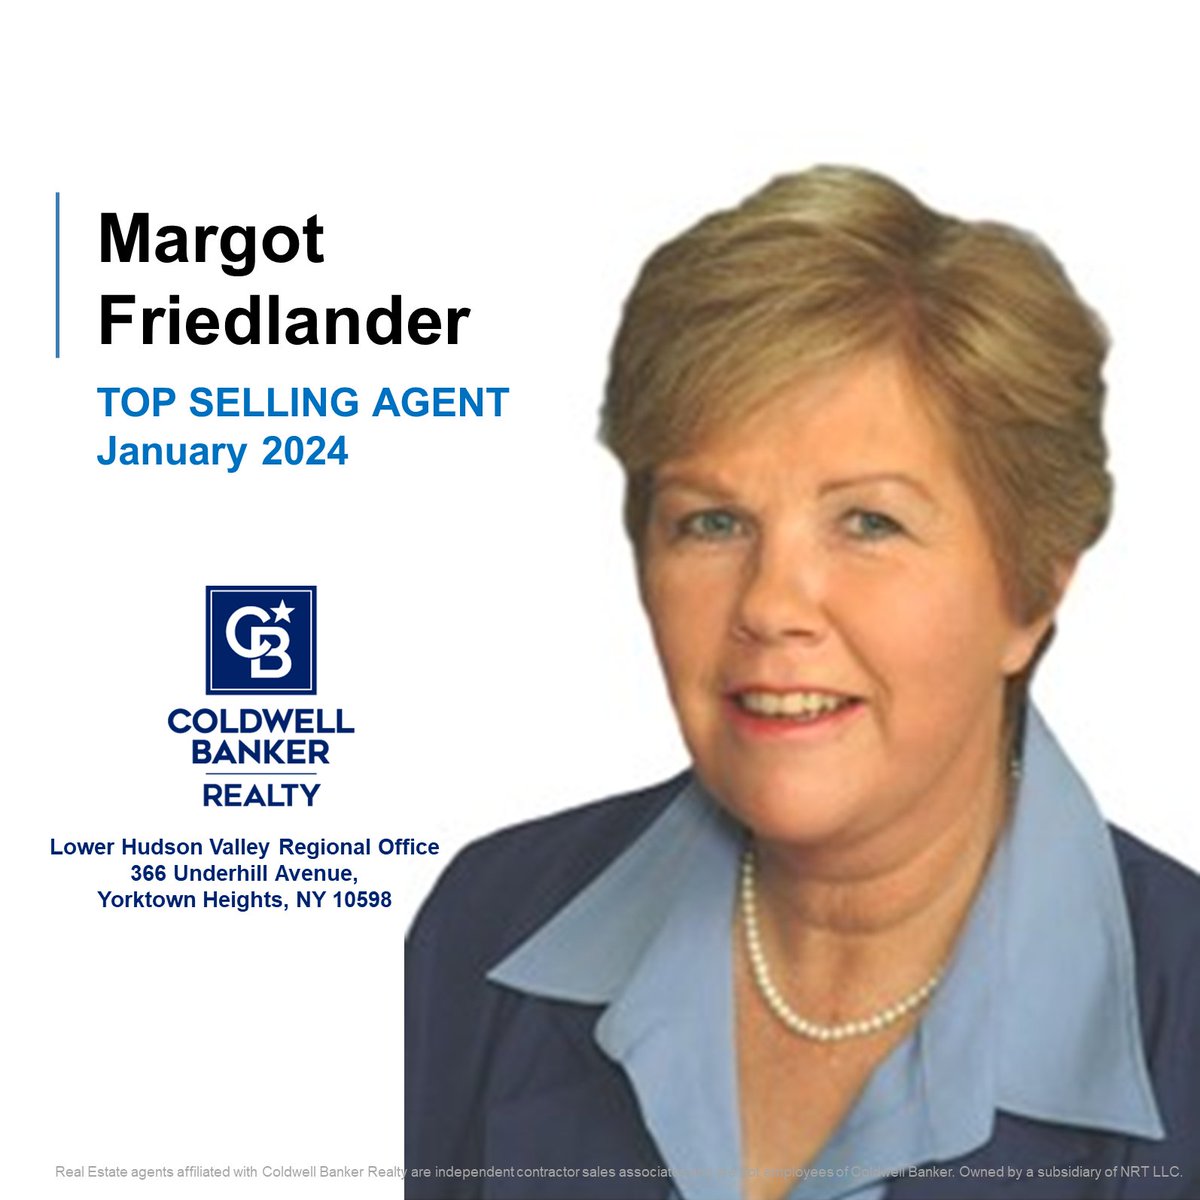 Congratulations to Margot Friedlander on being January’s Top Selling Agent.
Your dedication and hard work is greatly appreciated!
#congratulations #cbr #ctwc #realestate #lhvro #cbproud #cbtheplacetobe #bestagent #agentofcoldwellbanker #margotfriedlander